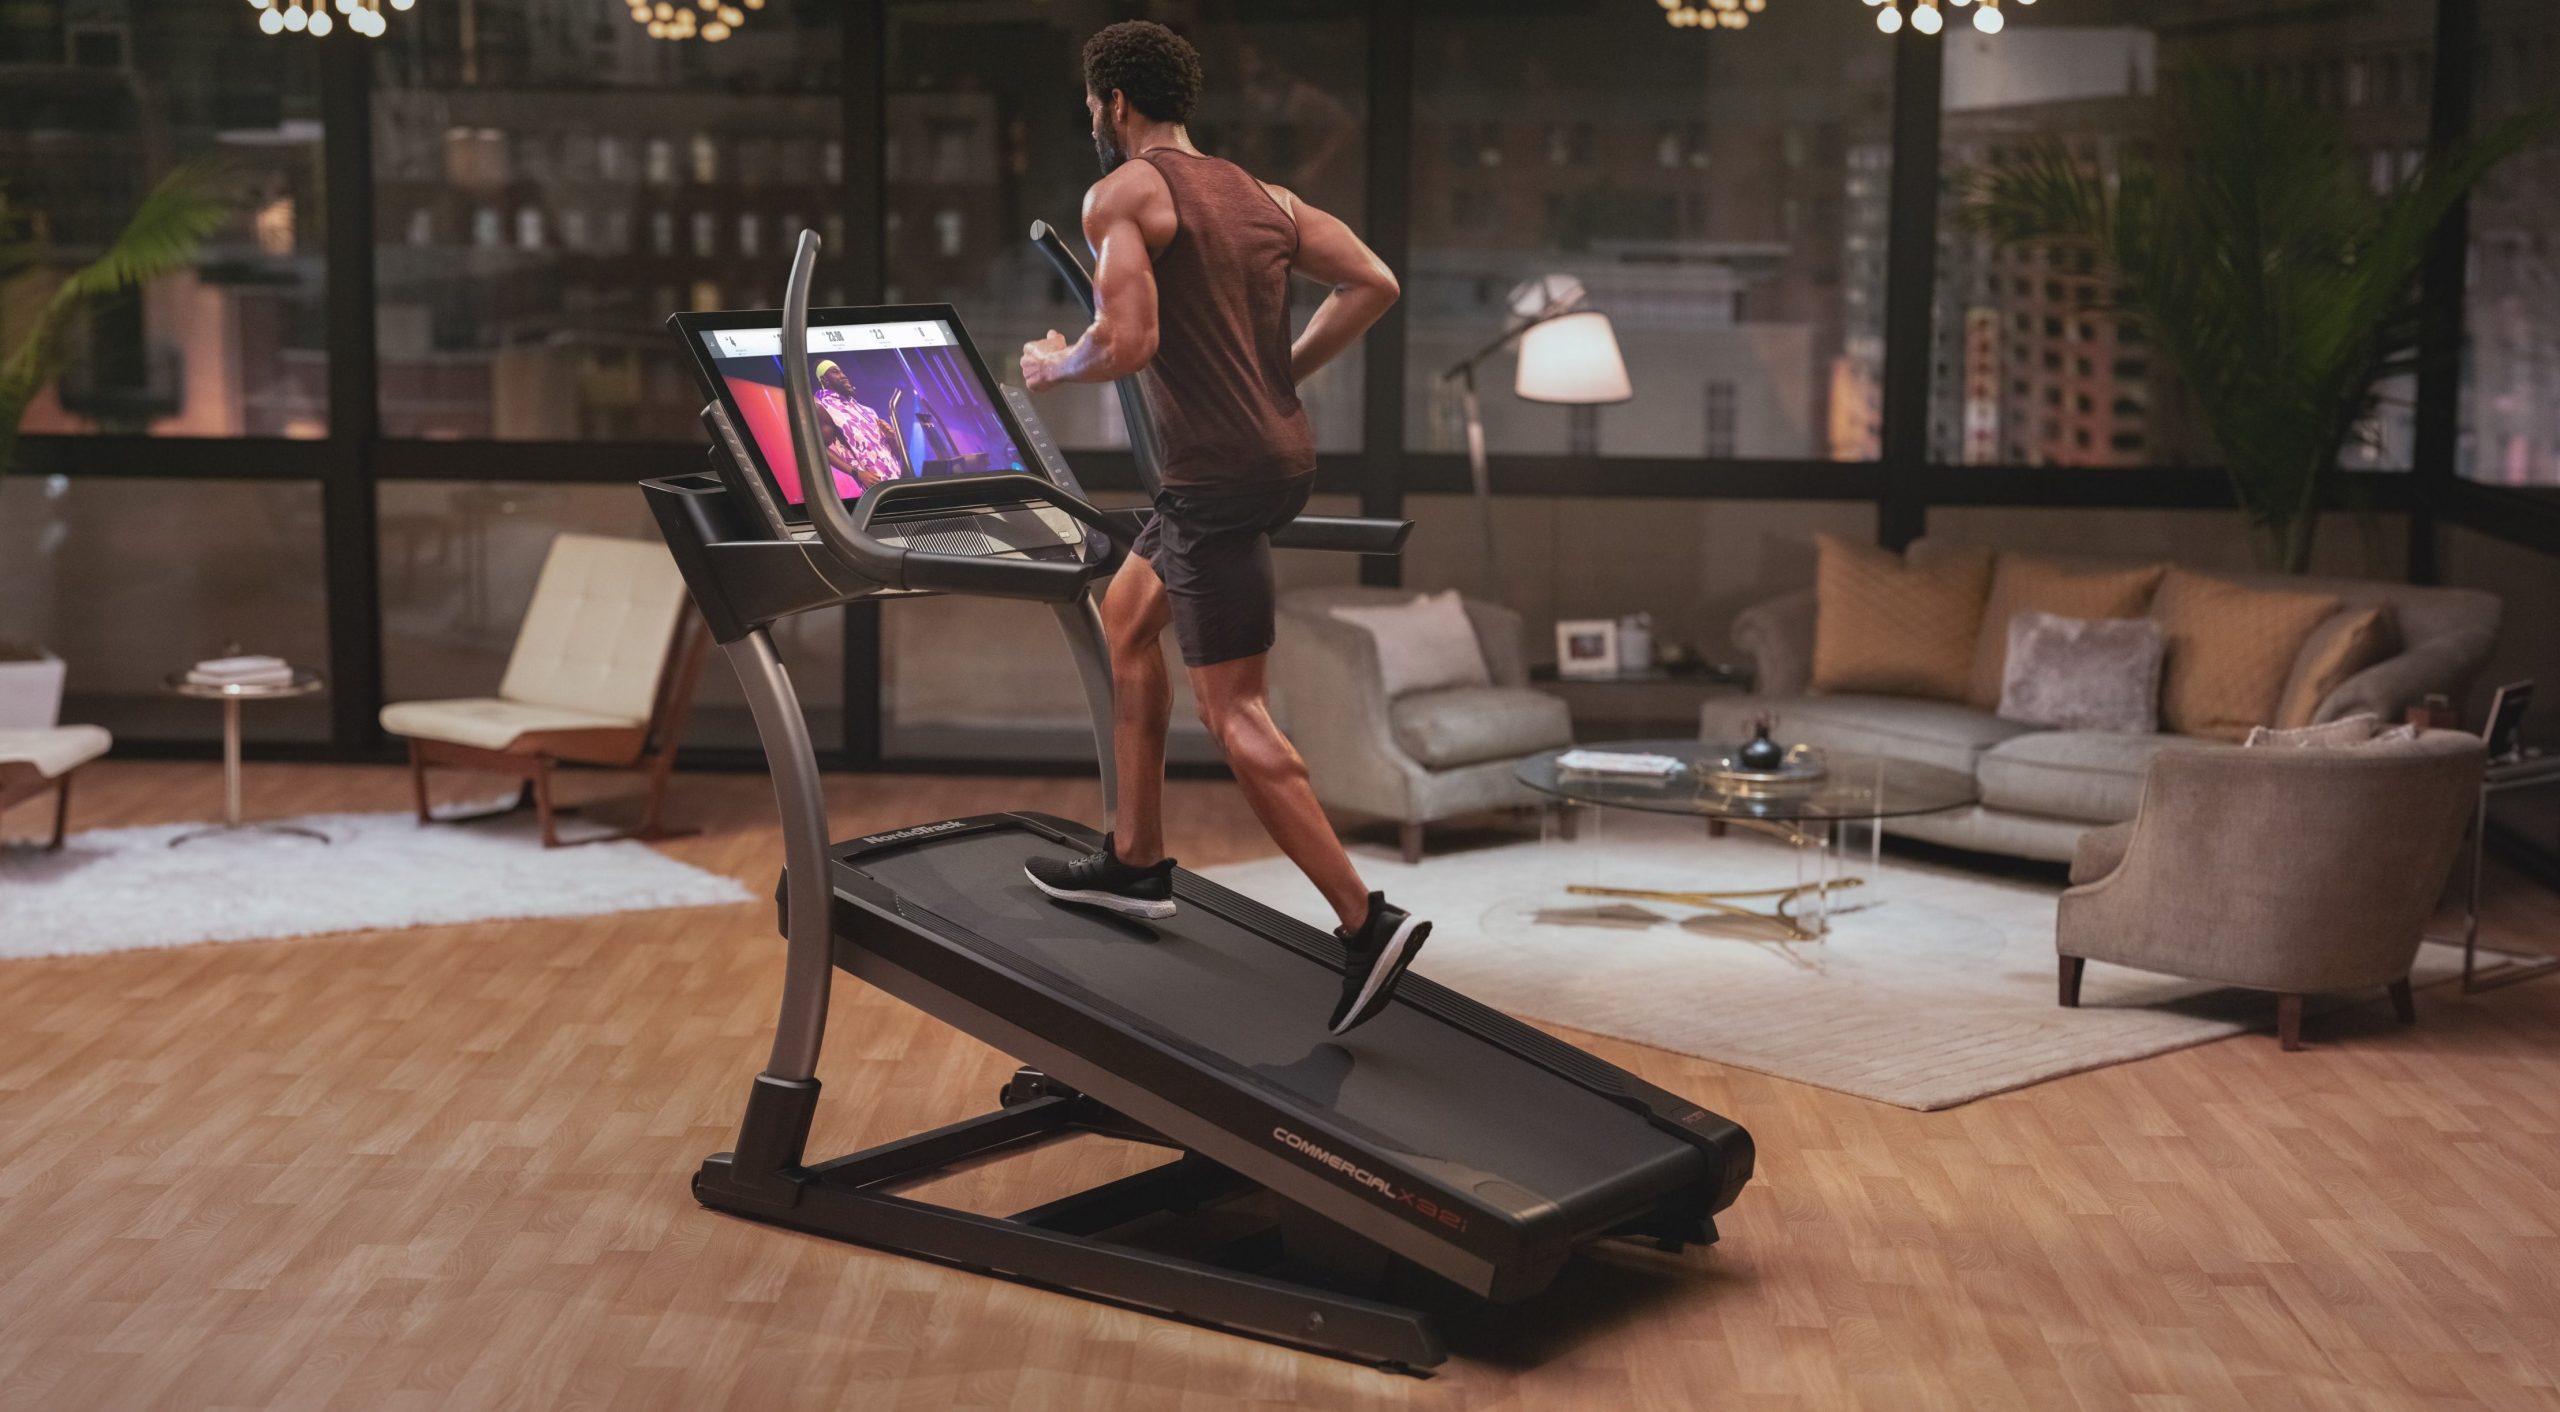 What’s New In Online Fitness Equipment Deals?